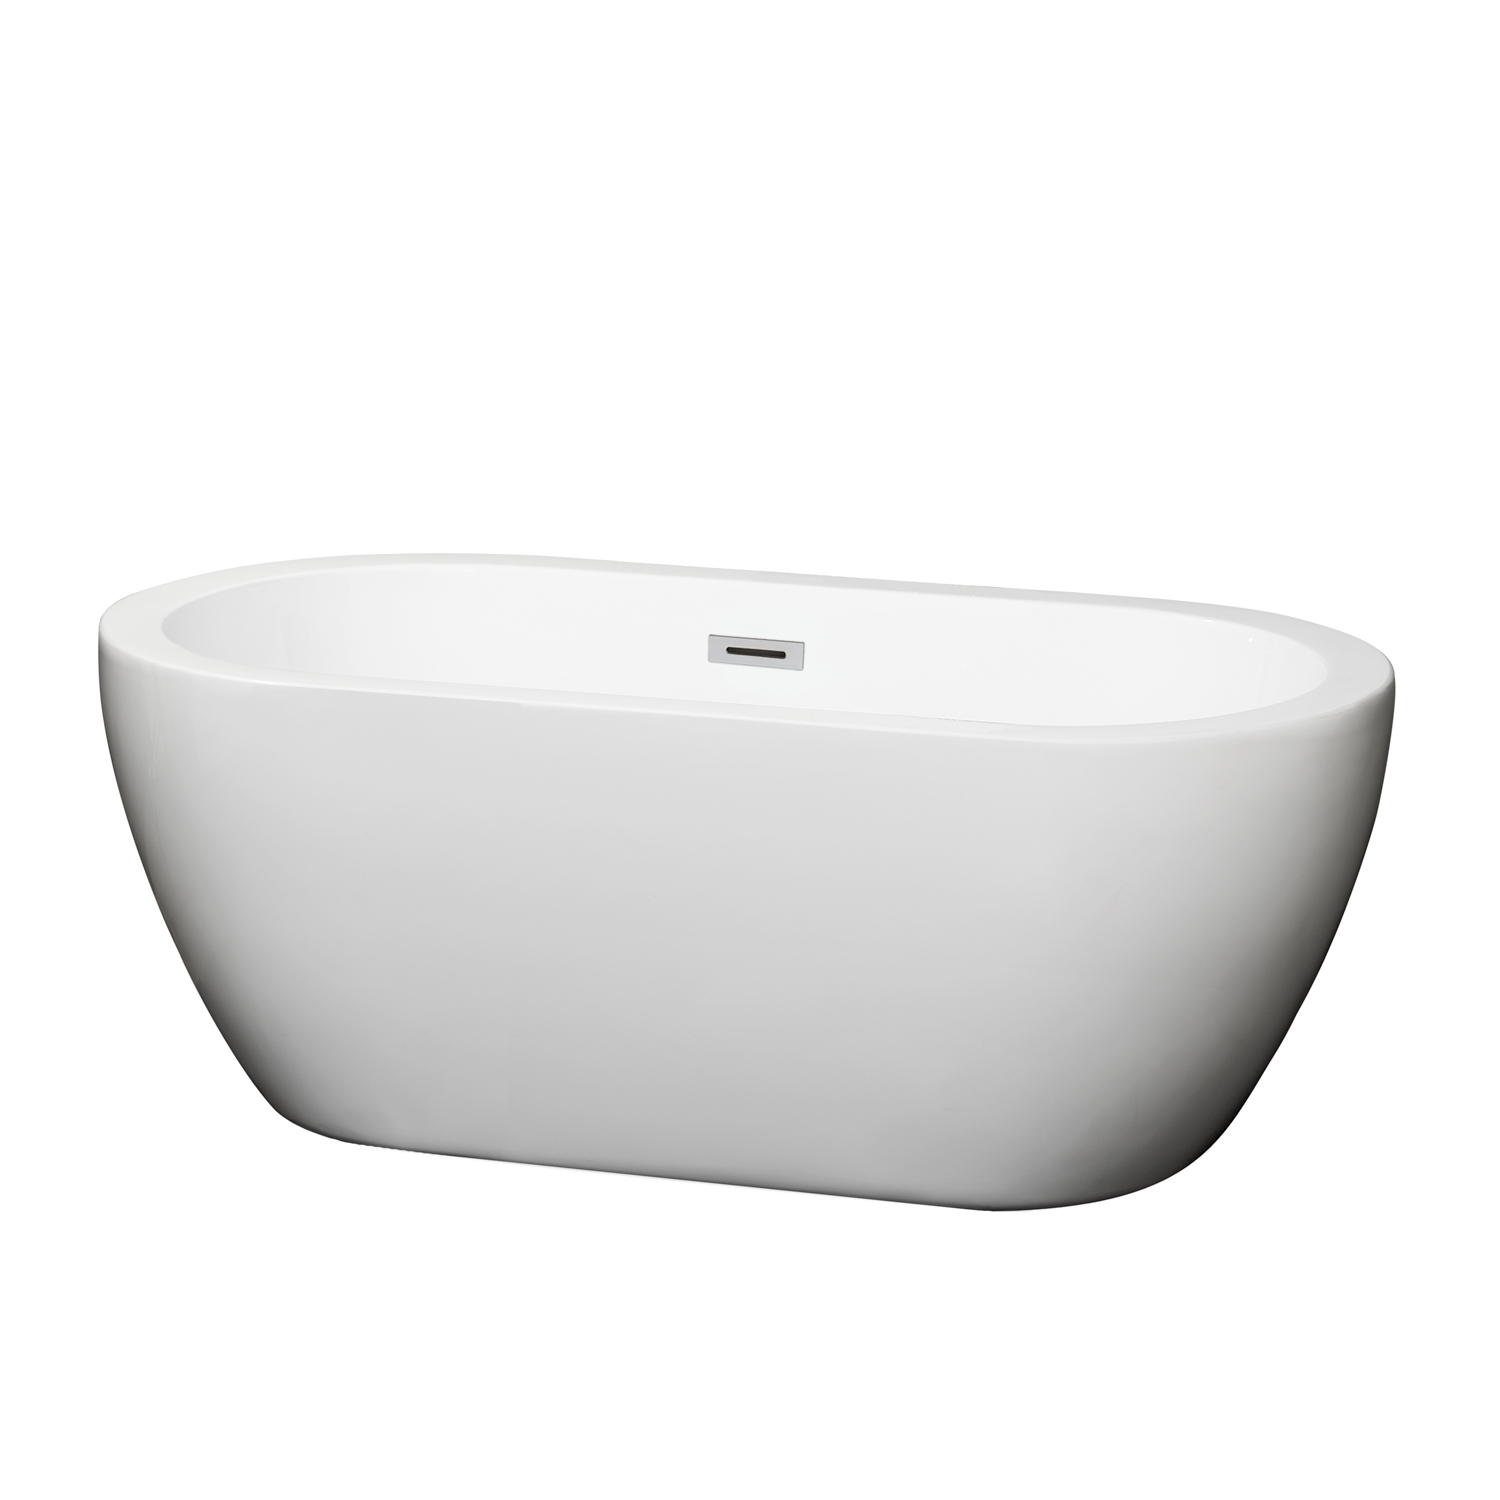 60" Freestanding Bathtub in White with Polished Chrome Drain and Overflow Trim with 2 Faucet Options